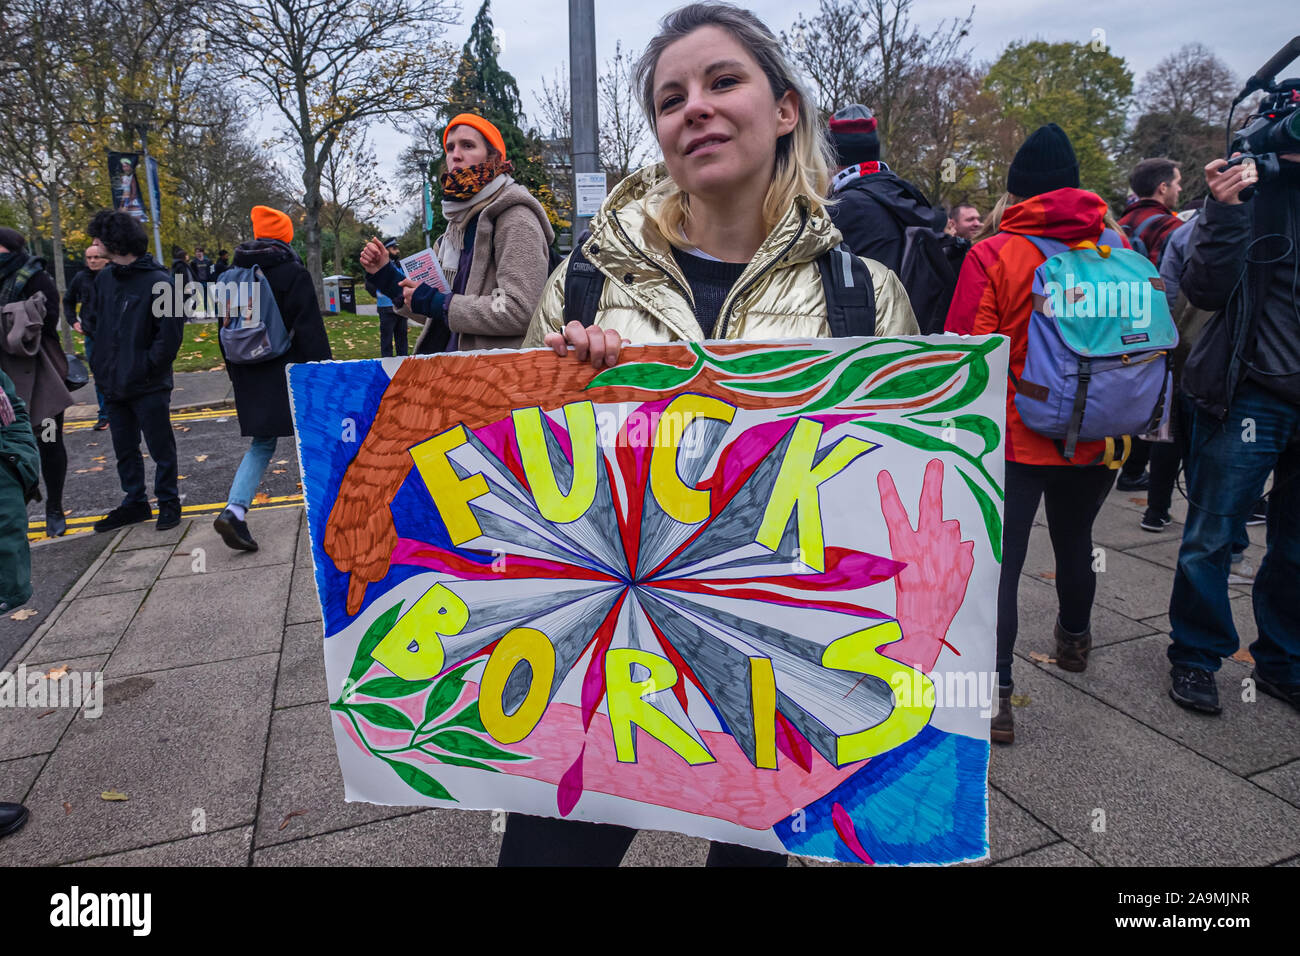 London, UK. 16th November 2019. A woman holds a hand painted poster. Protesters from FCKBoris arrive at Brunel University in Uxbridge  urging everyone to register and vote against Boris Johnson and kick him out for his racist, elitist politics.  Johnson had a majority of just over 5 thousand in 2017 and Labour candidate Ali Milani has strong hopes of beating him and the other 10 candidates. Peter Marshall/Alamy Live News Stock Photo